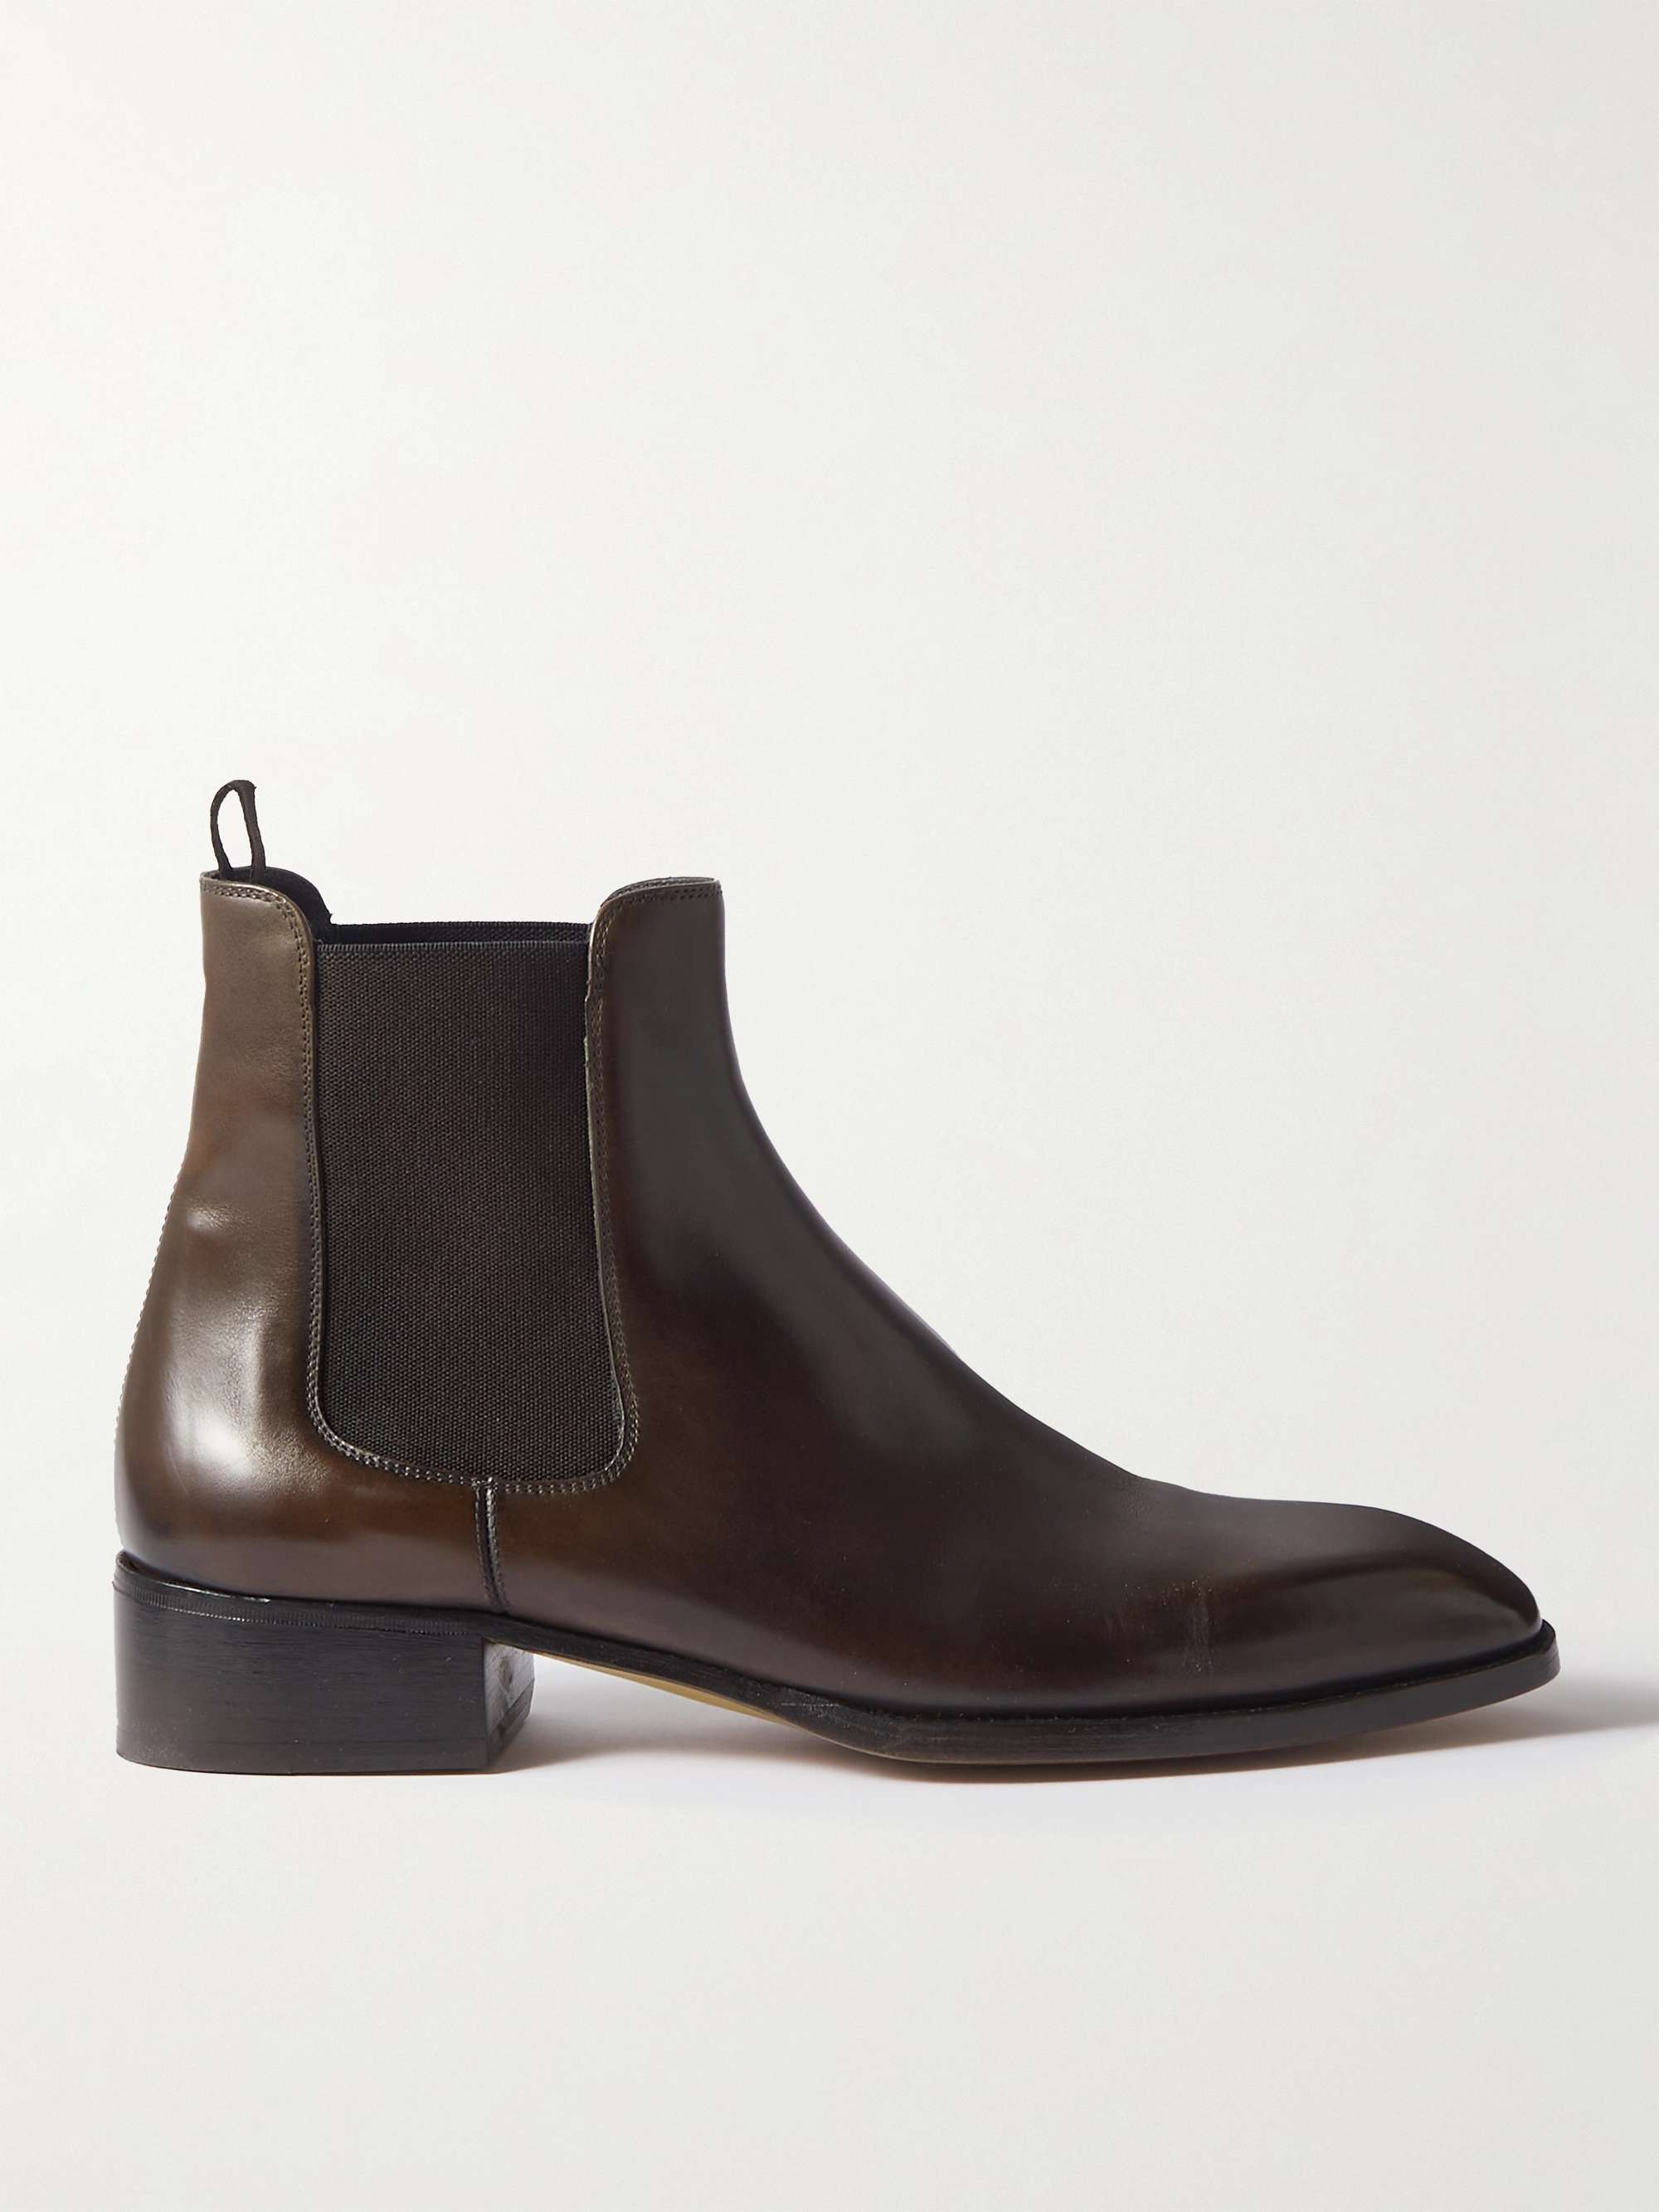 TOM FORD Leather Chelsea Boots